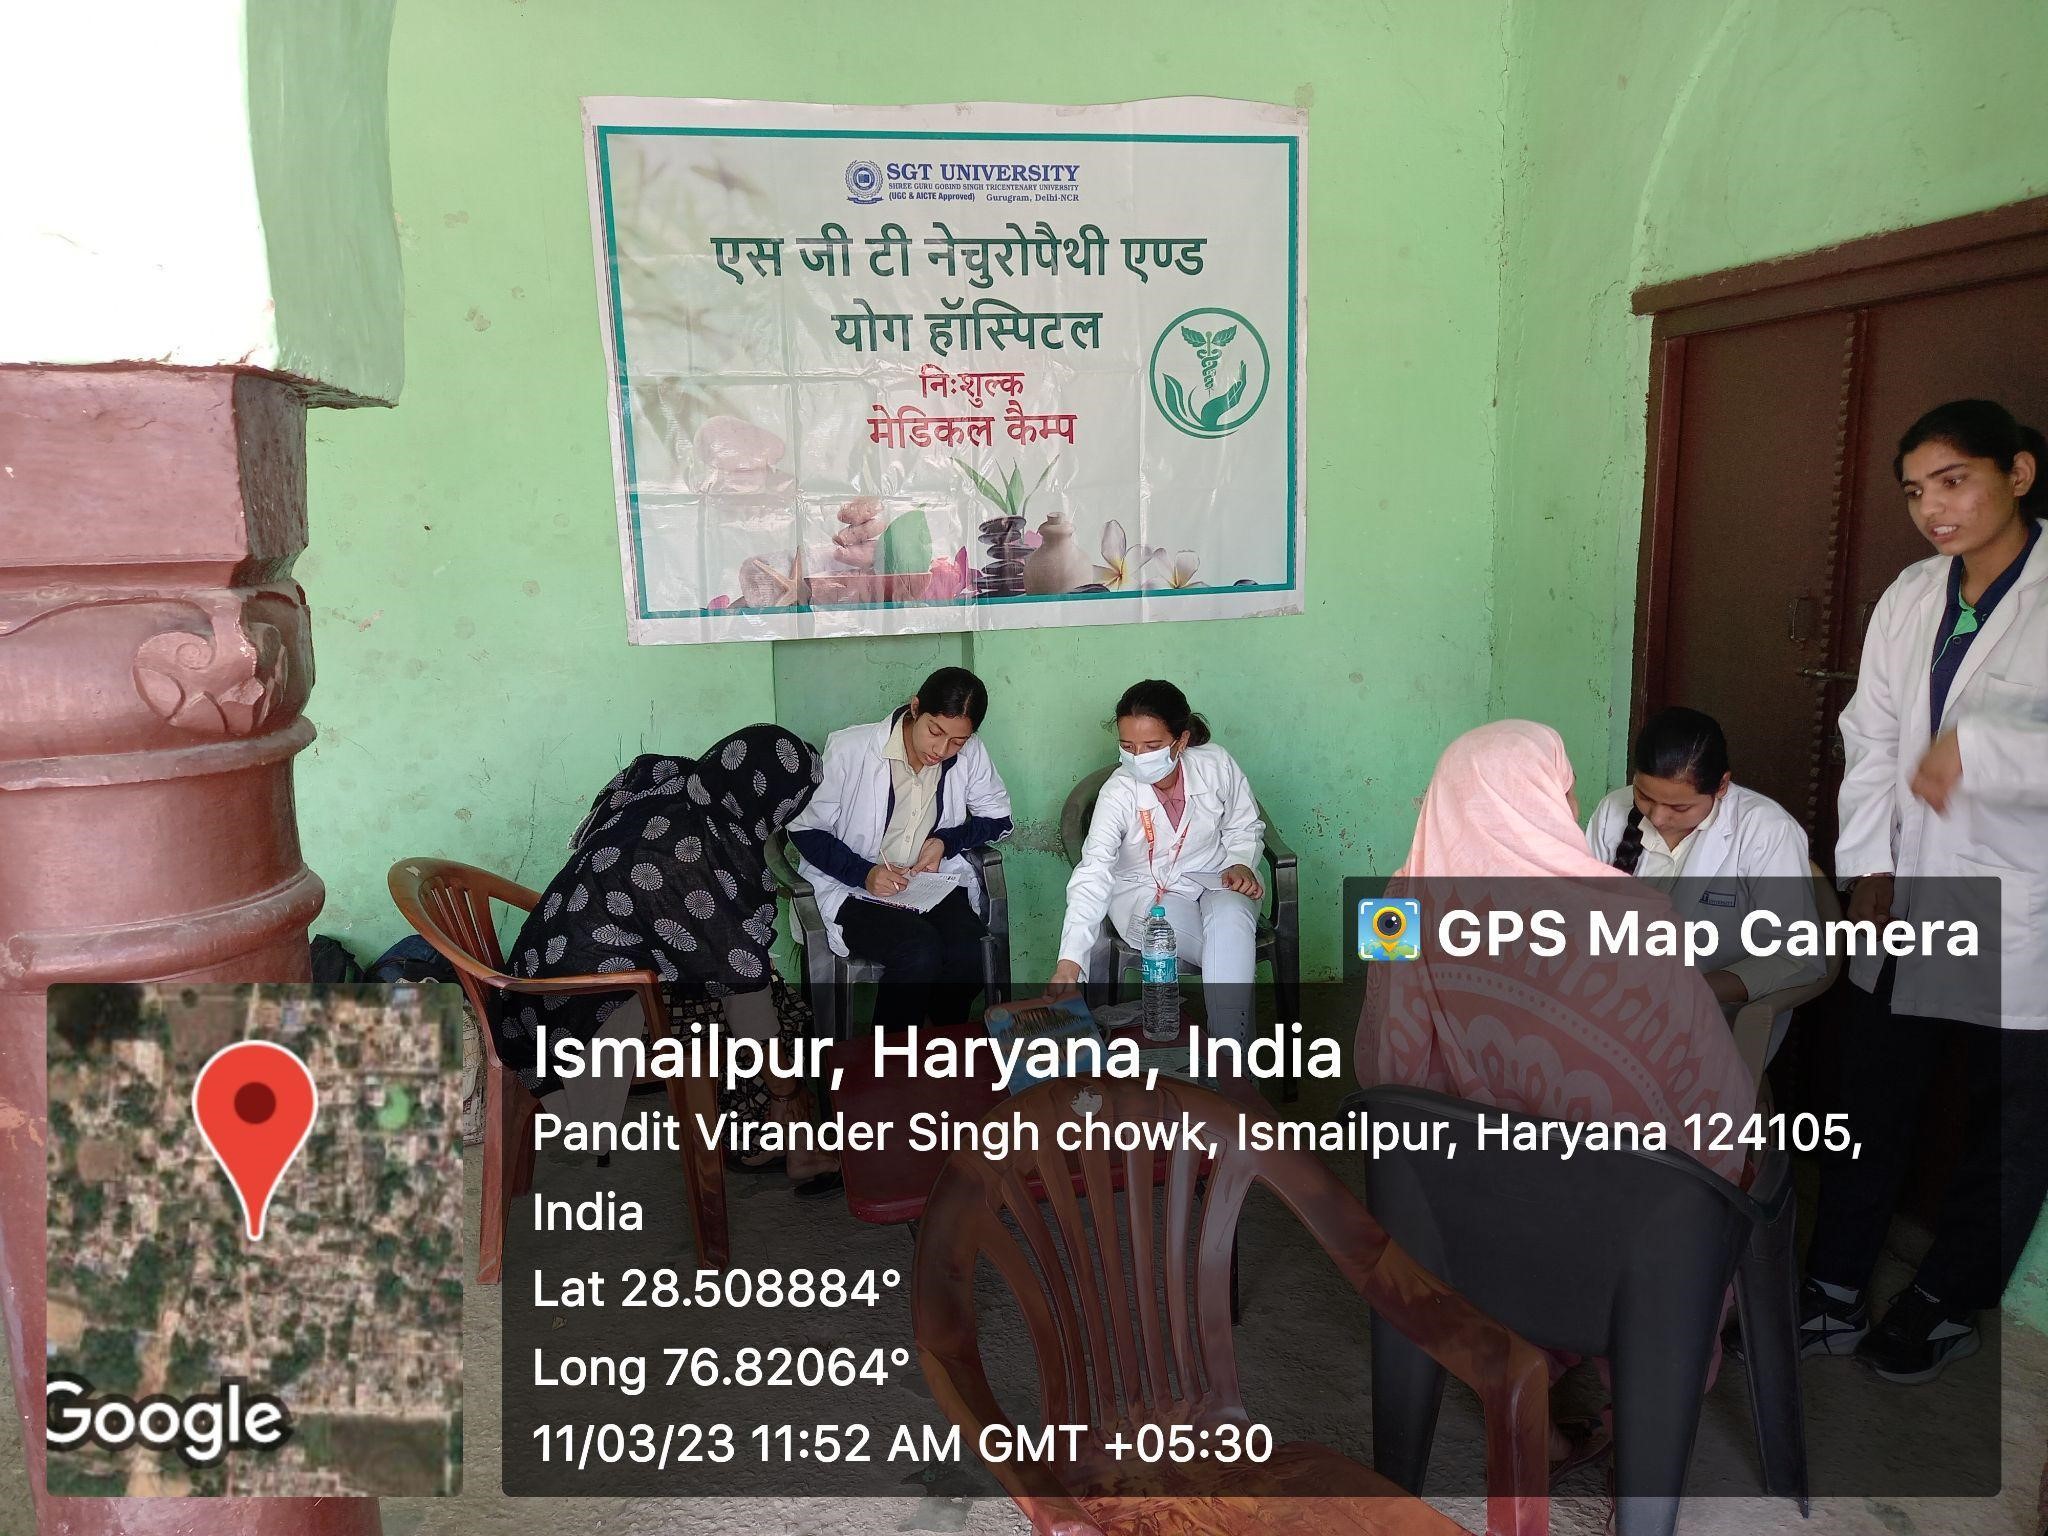 You are currently viewing Free Naturopathy and Yoga Awareness and Health checkup camp at Ismailpur Village, Budhera, Haryana.